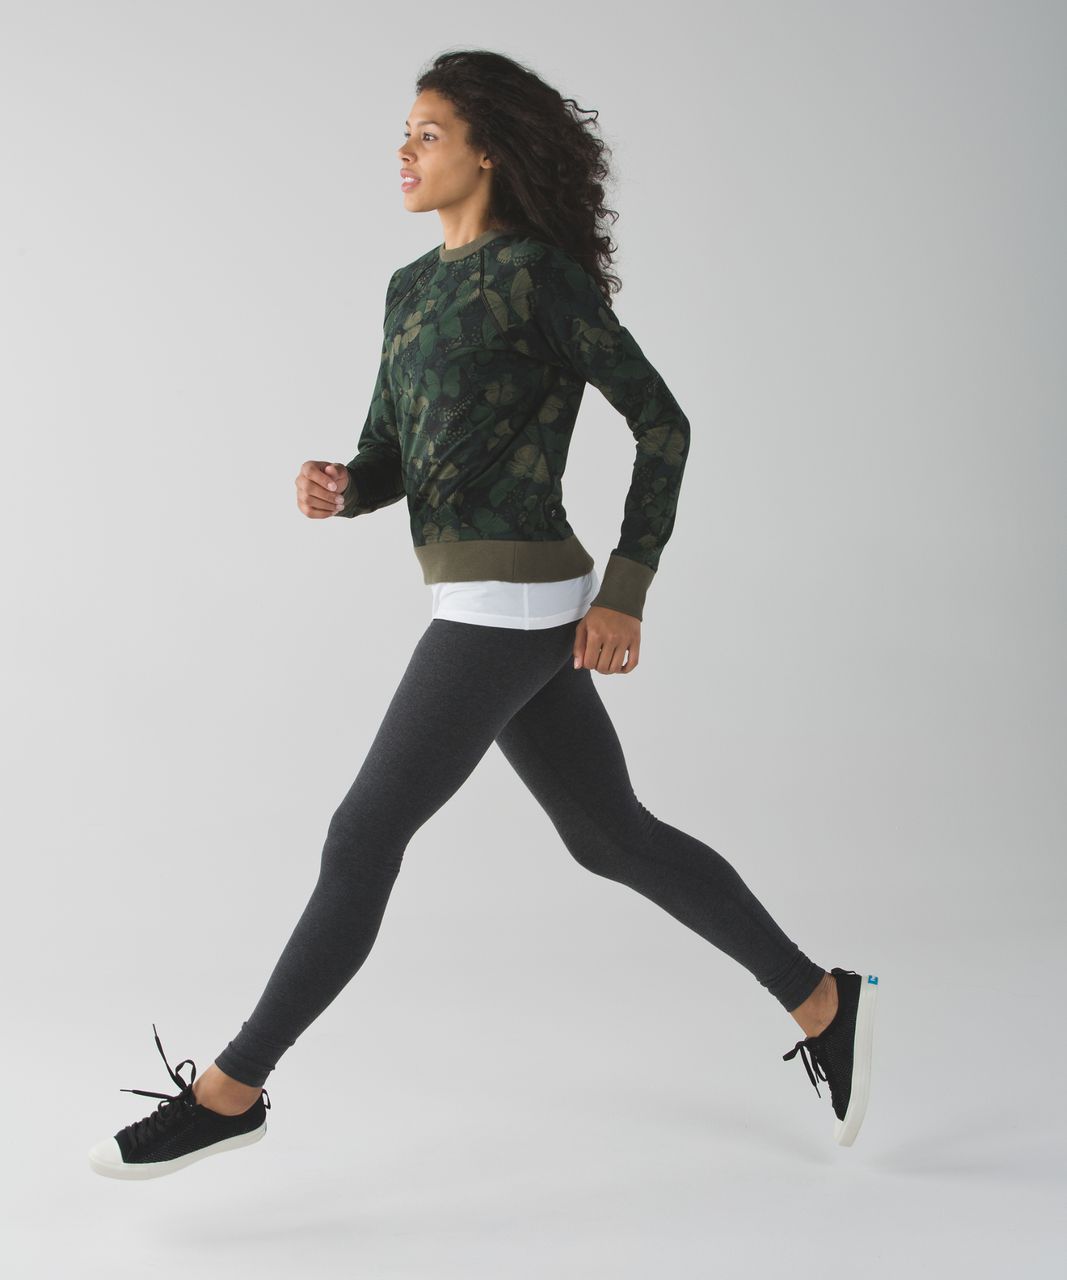 Lululemon Crew Love Pullover - Biggie So Fly Butterfly Fatigue Green Black / Fatigue Green